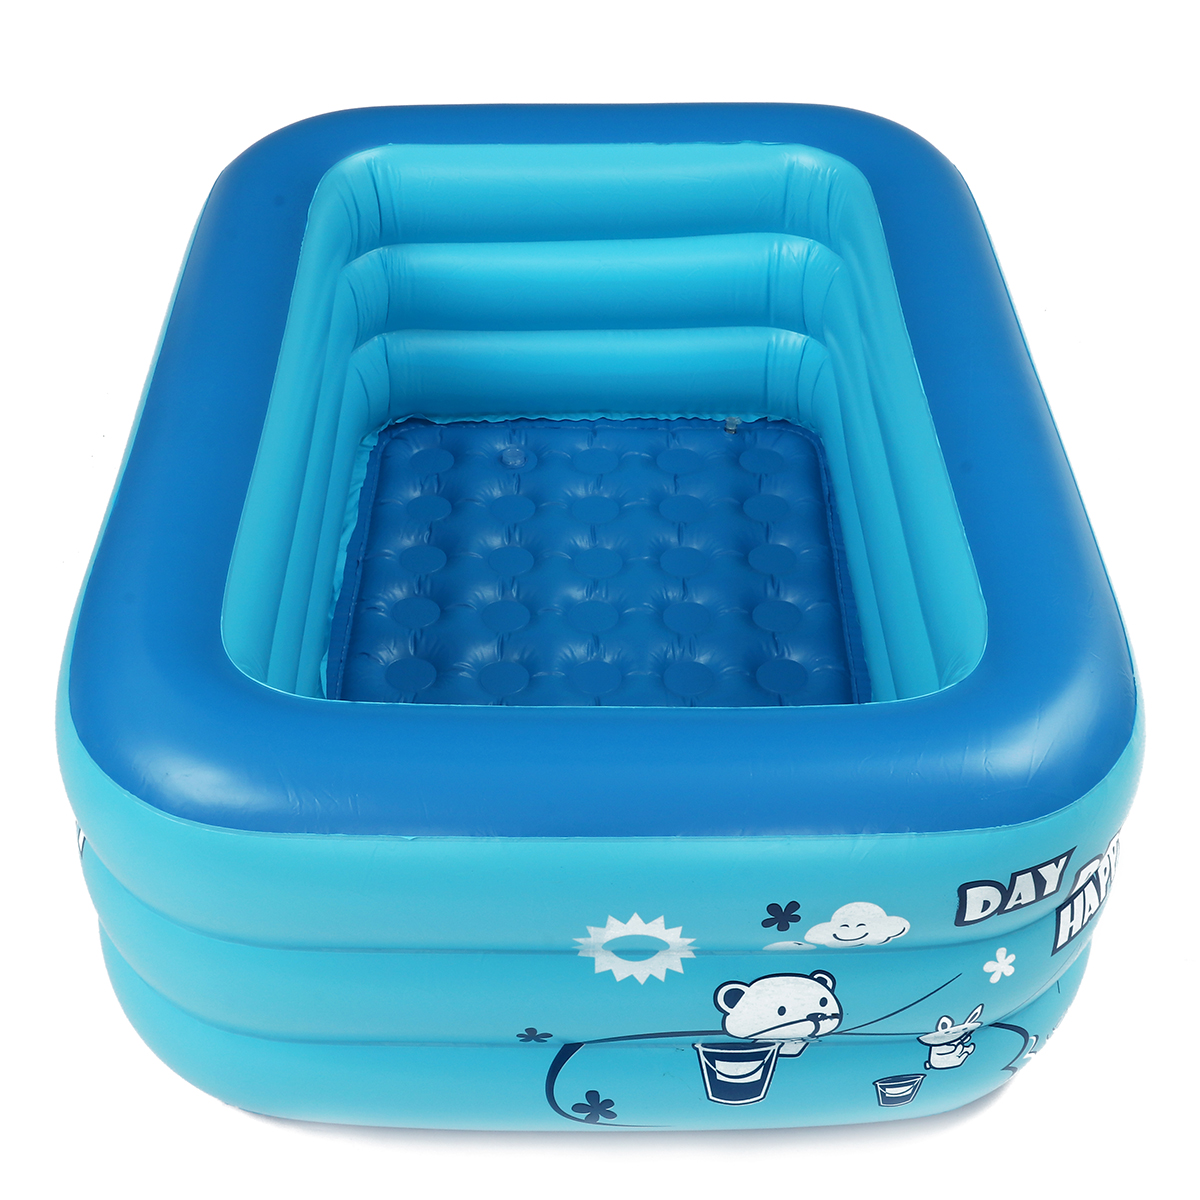 180cm-Thicken-Inflatable-Swimming-Pool-Rectangle-Baby-Children-Square-Bathing-Tub-3-Layer-Pool-Summe-1484666-12